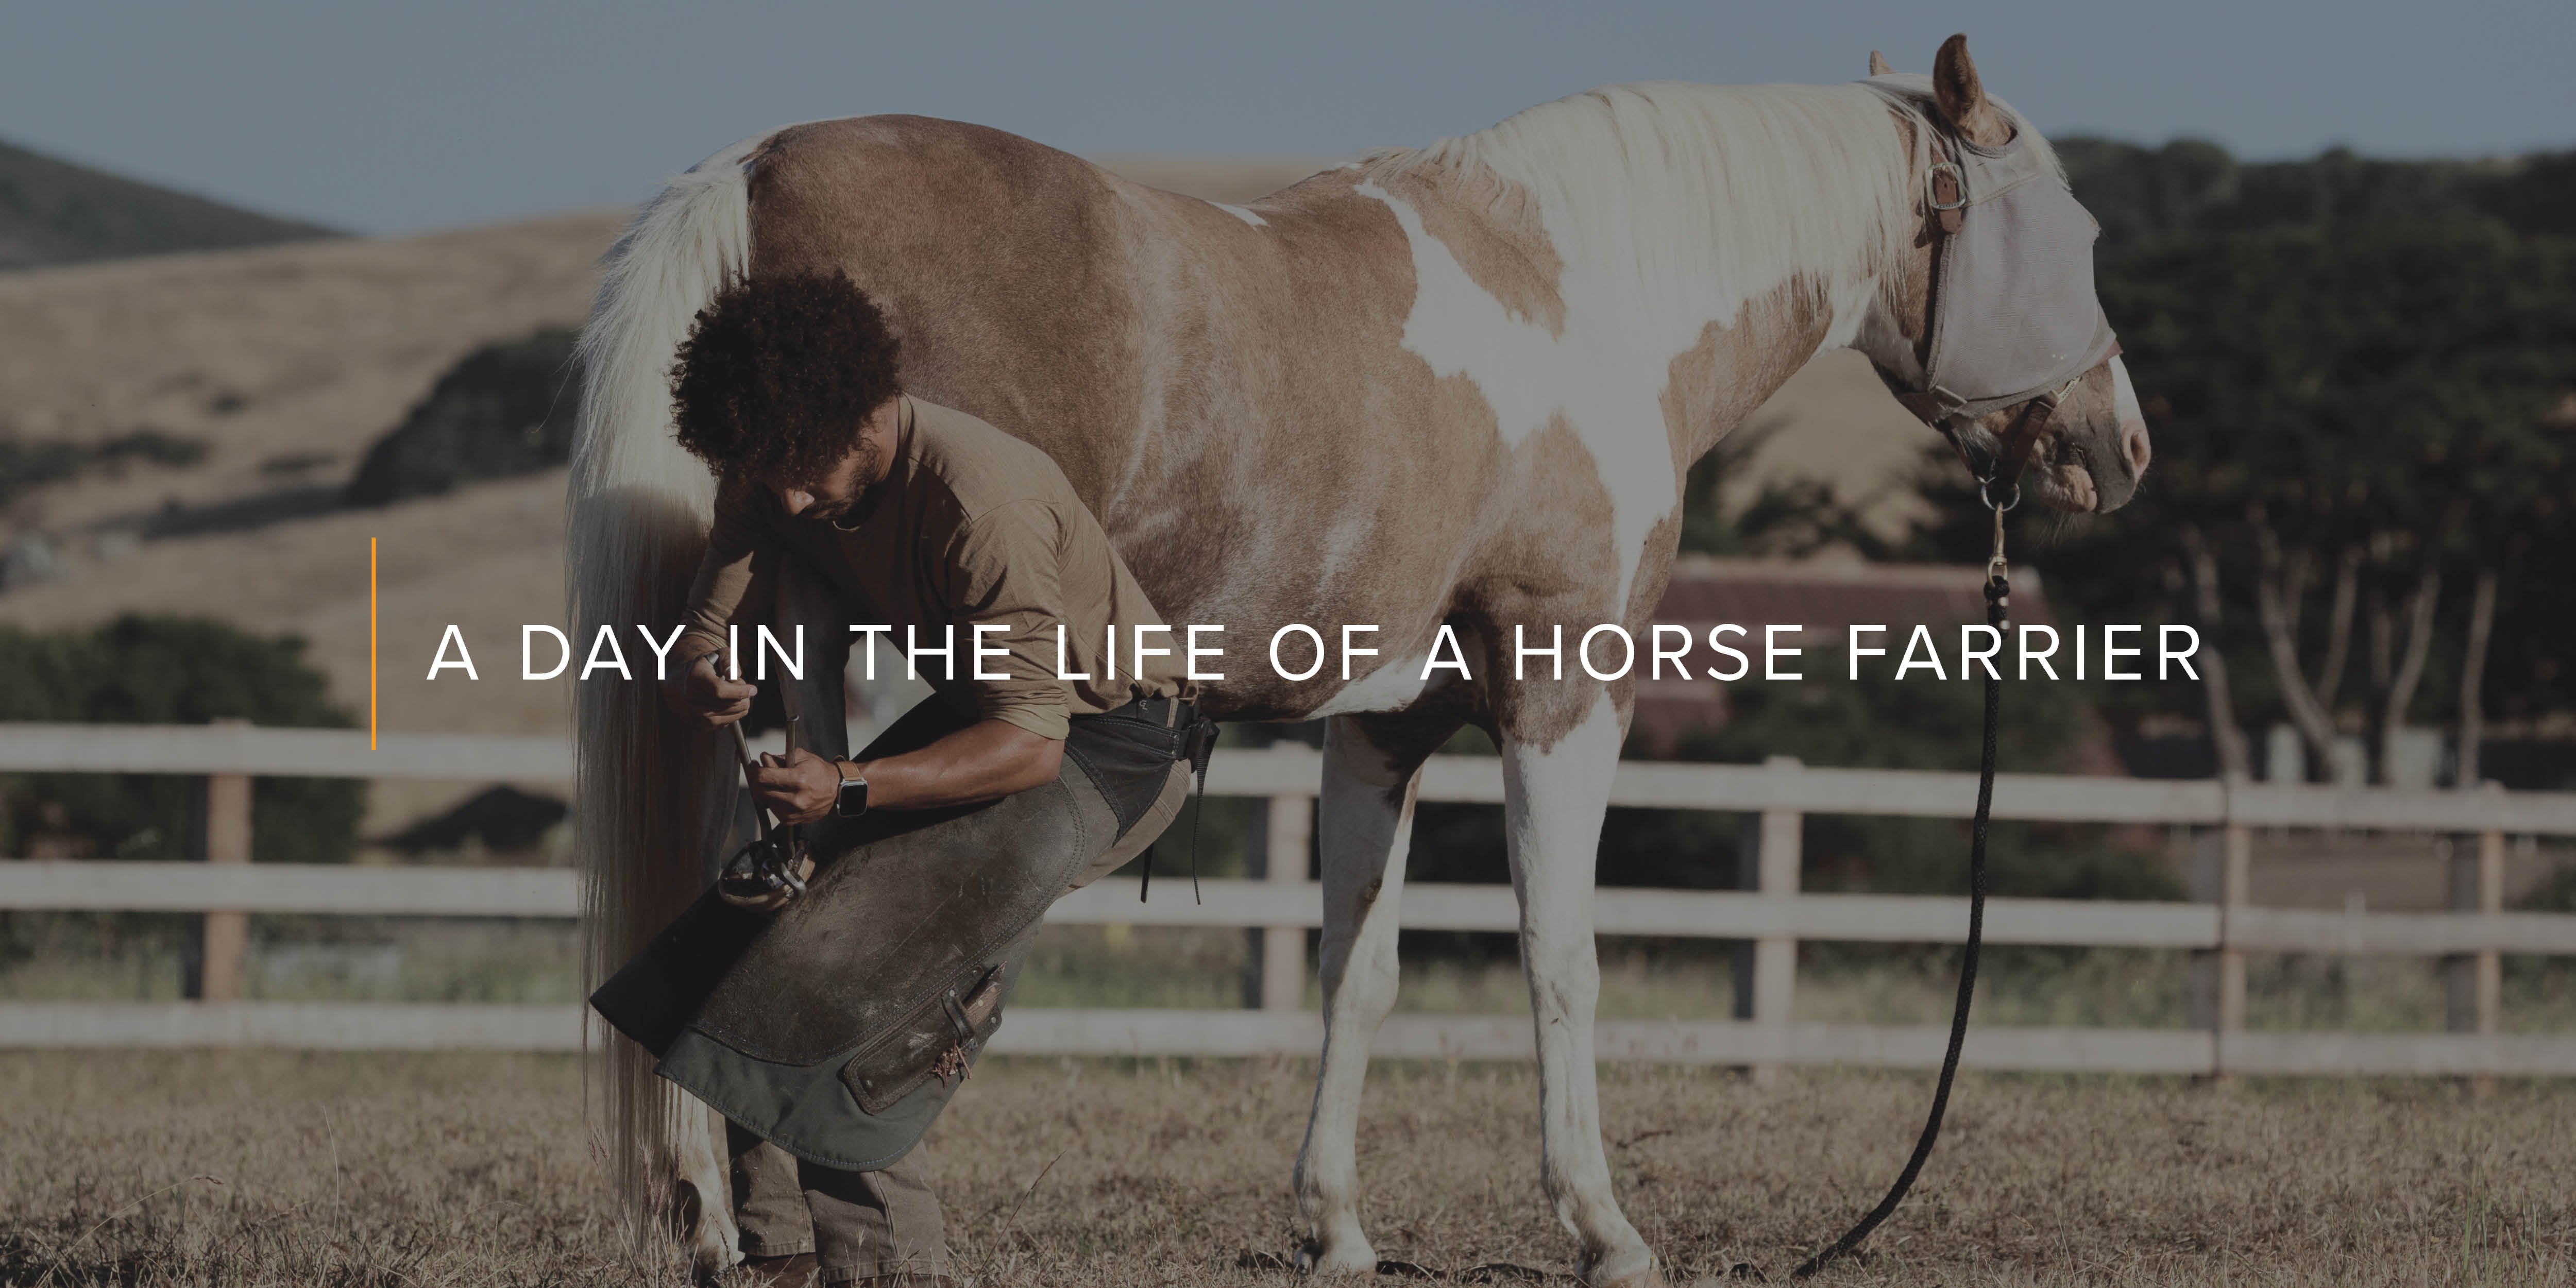 A Day in the Life of a Horse Farrier